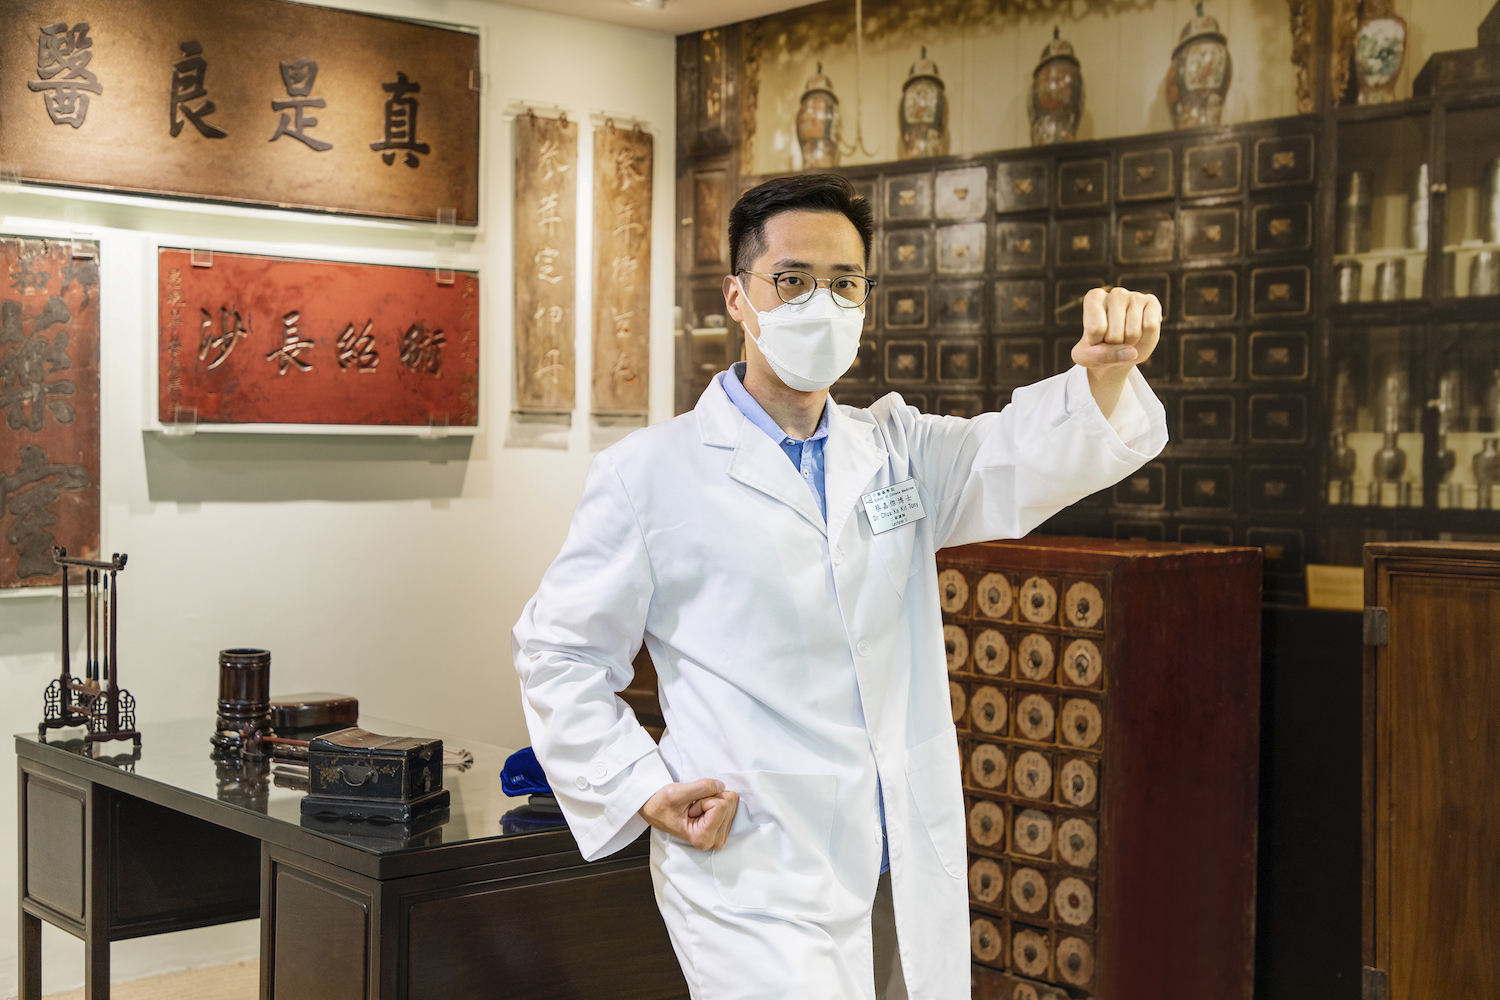 A call to pass Chinese medicine knowledge on to future generations